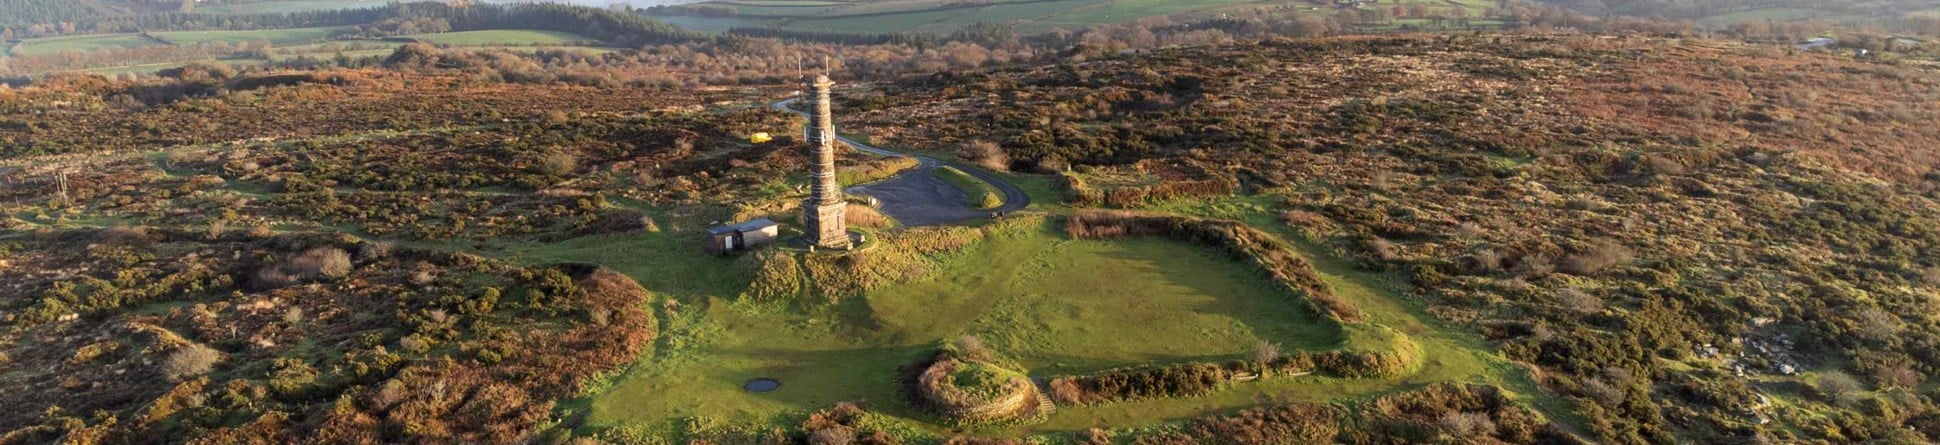 Aerial view from south across the site of Kit Hill, Cornwall. It shows a folly in the centre surrounded by the countryside.